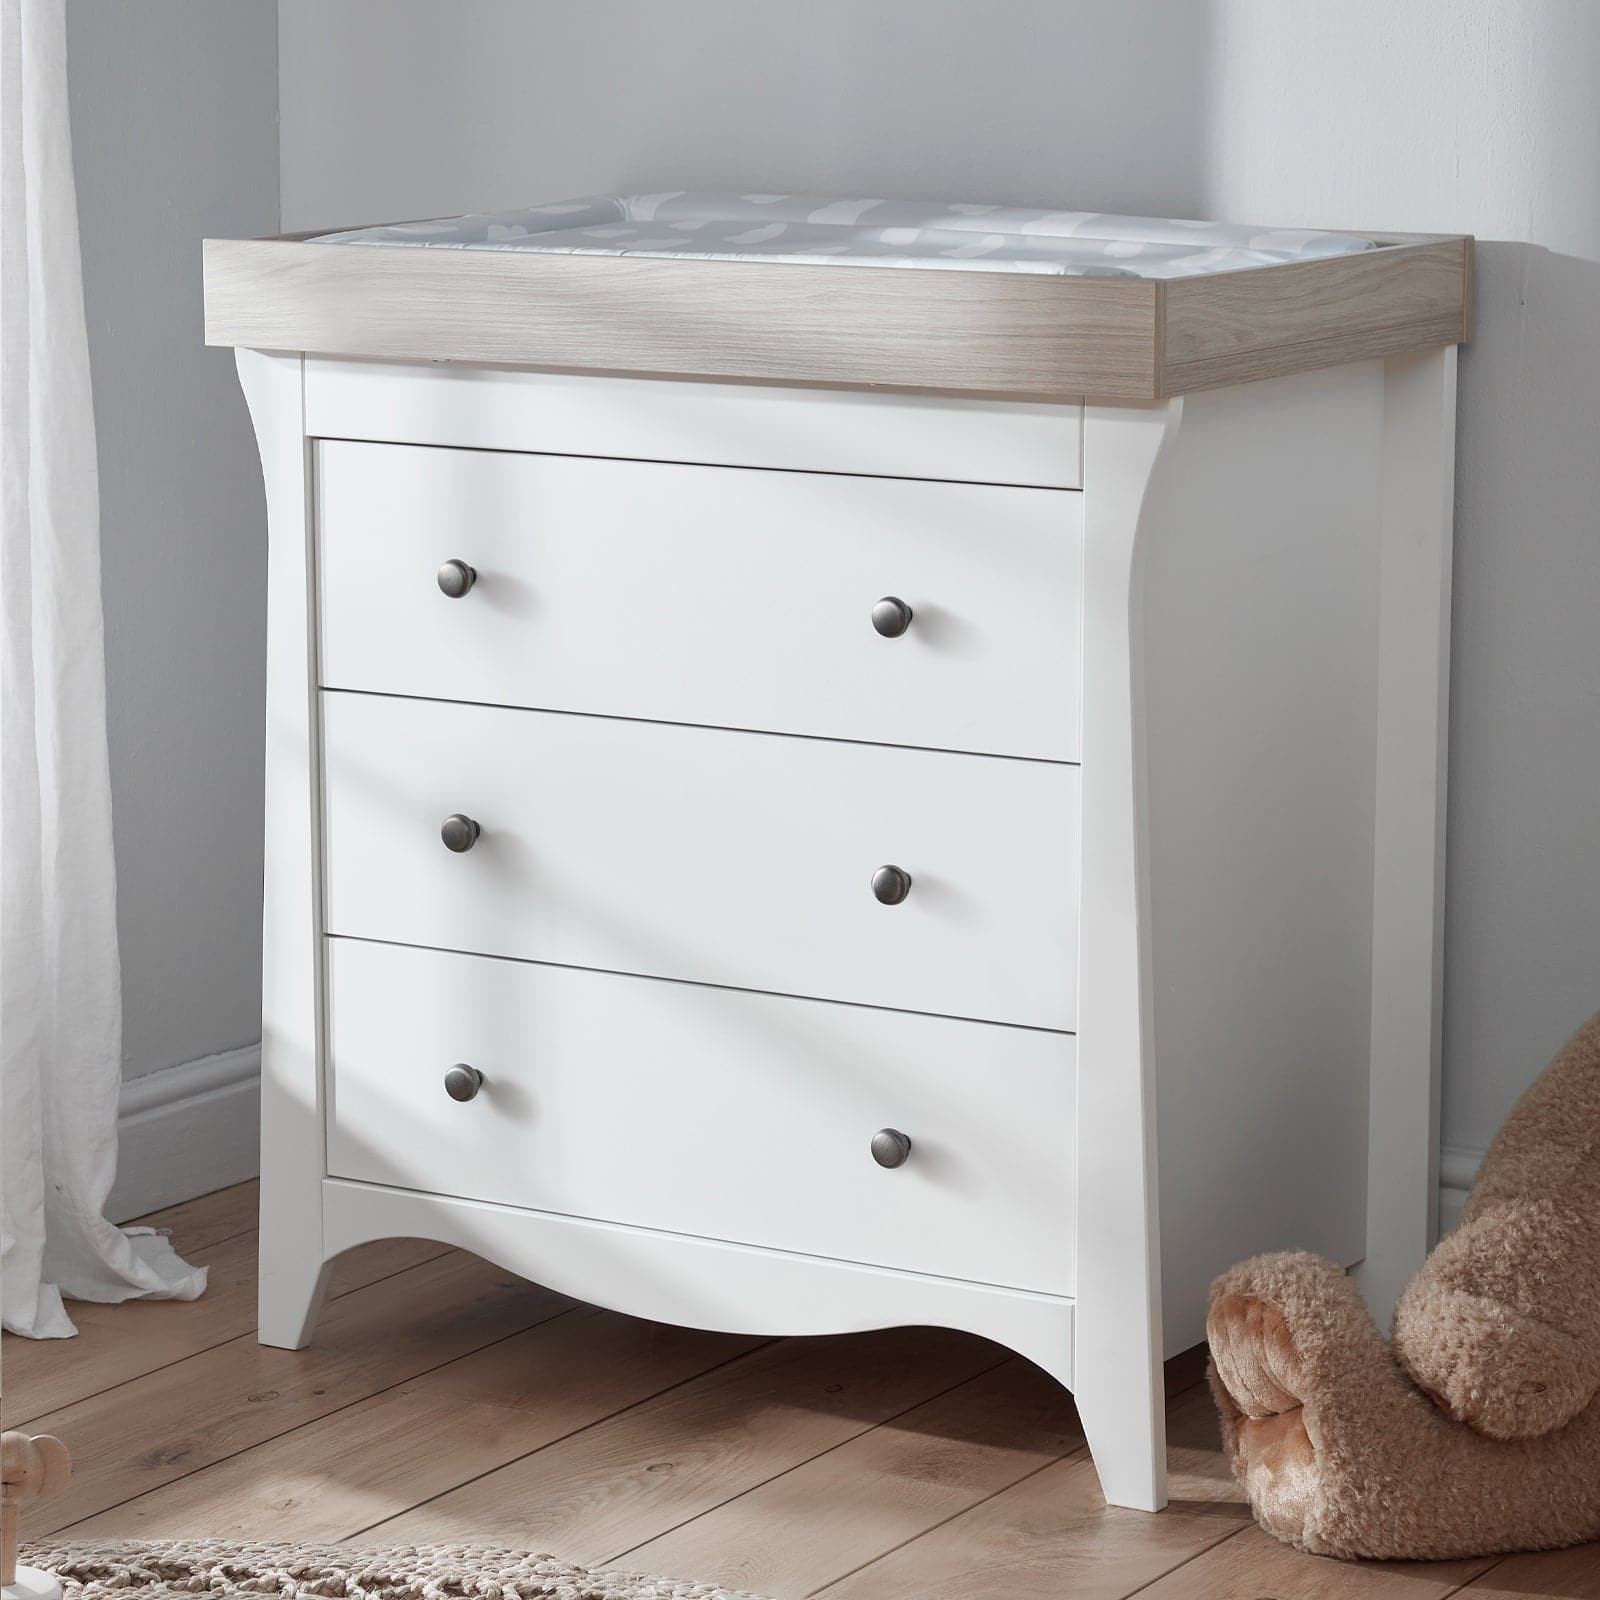 Cuddleco Clara 2 Piece Nursery Furniture Set - White & Ash - For Your Little One